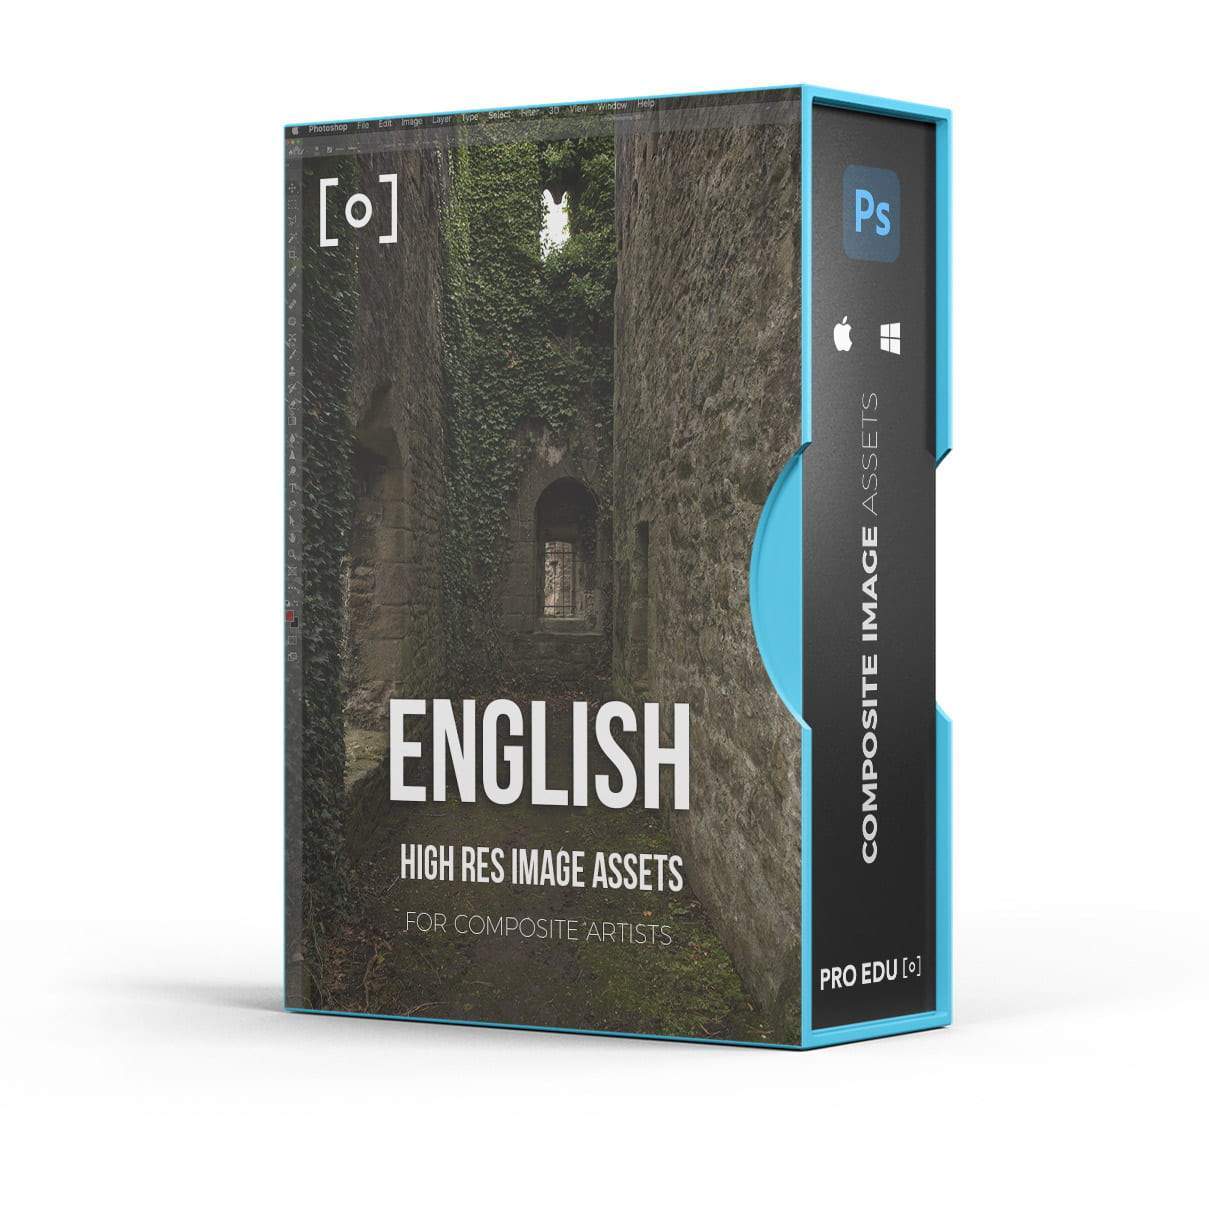 Composite Stock Asset English Abbey Pack 4 Photoshop Stock - PRO EDU PRO EDU PRO EDU